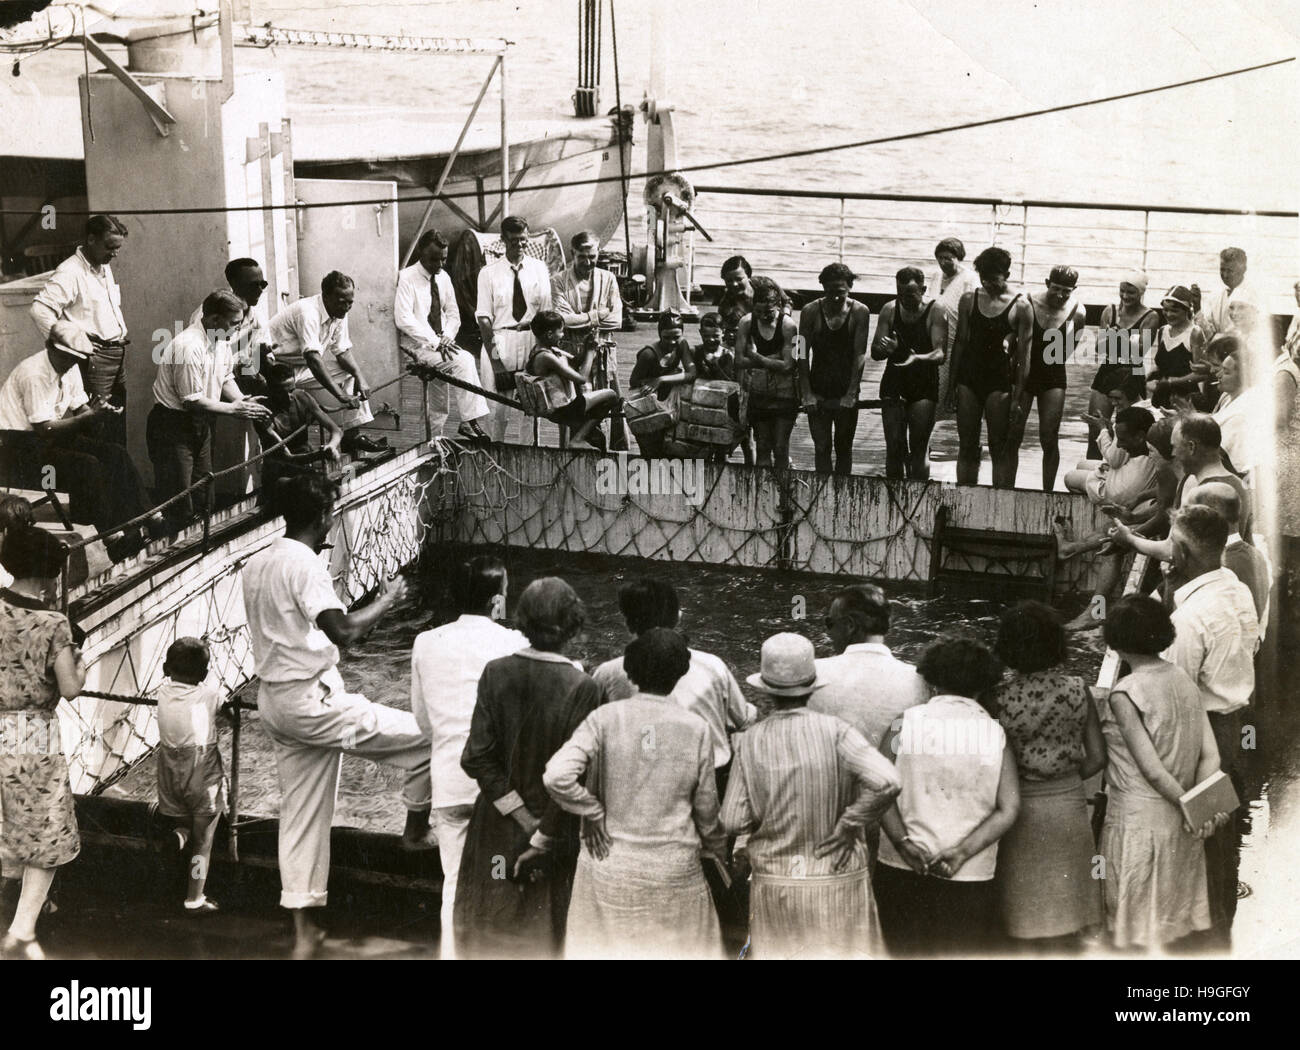 Antique c1930 photograph, passengers aboard the SS Virginia look in the swimming pool tank. SS Brazil was a US turbo-electric ocean liner. She was completed in 1928 as SS Virginia, and refitted and renamed as SS Brazil in 1938. SOURCE: ORIGINAL PHOTOGRAPHIC PRINT. Stock Photo